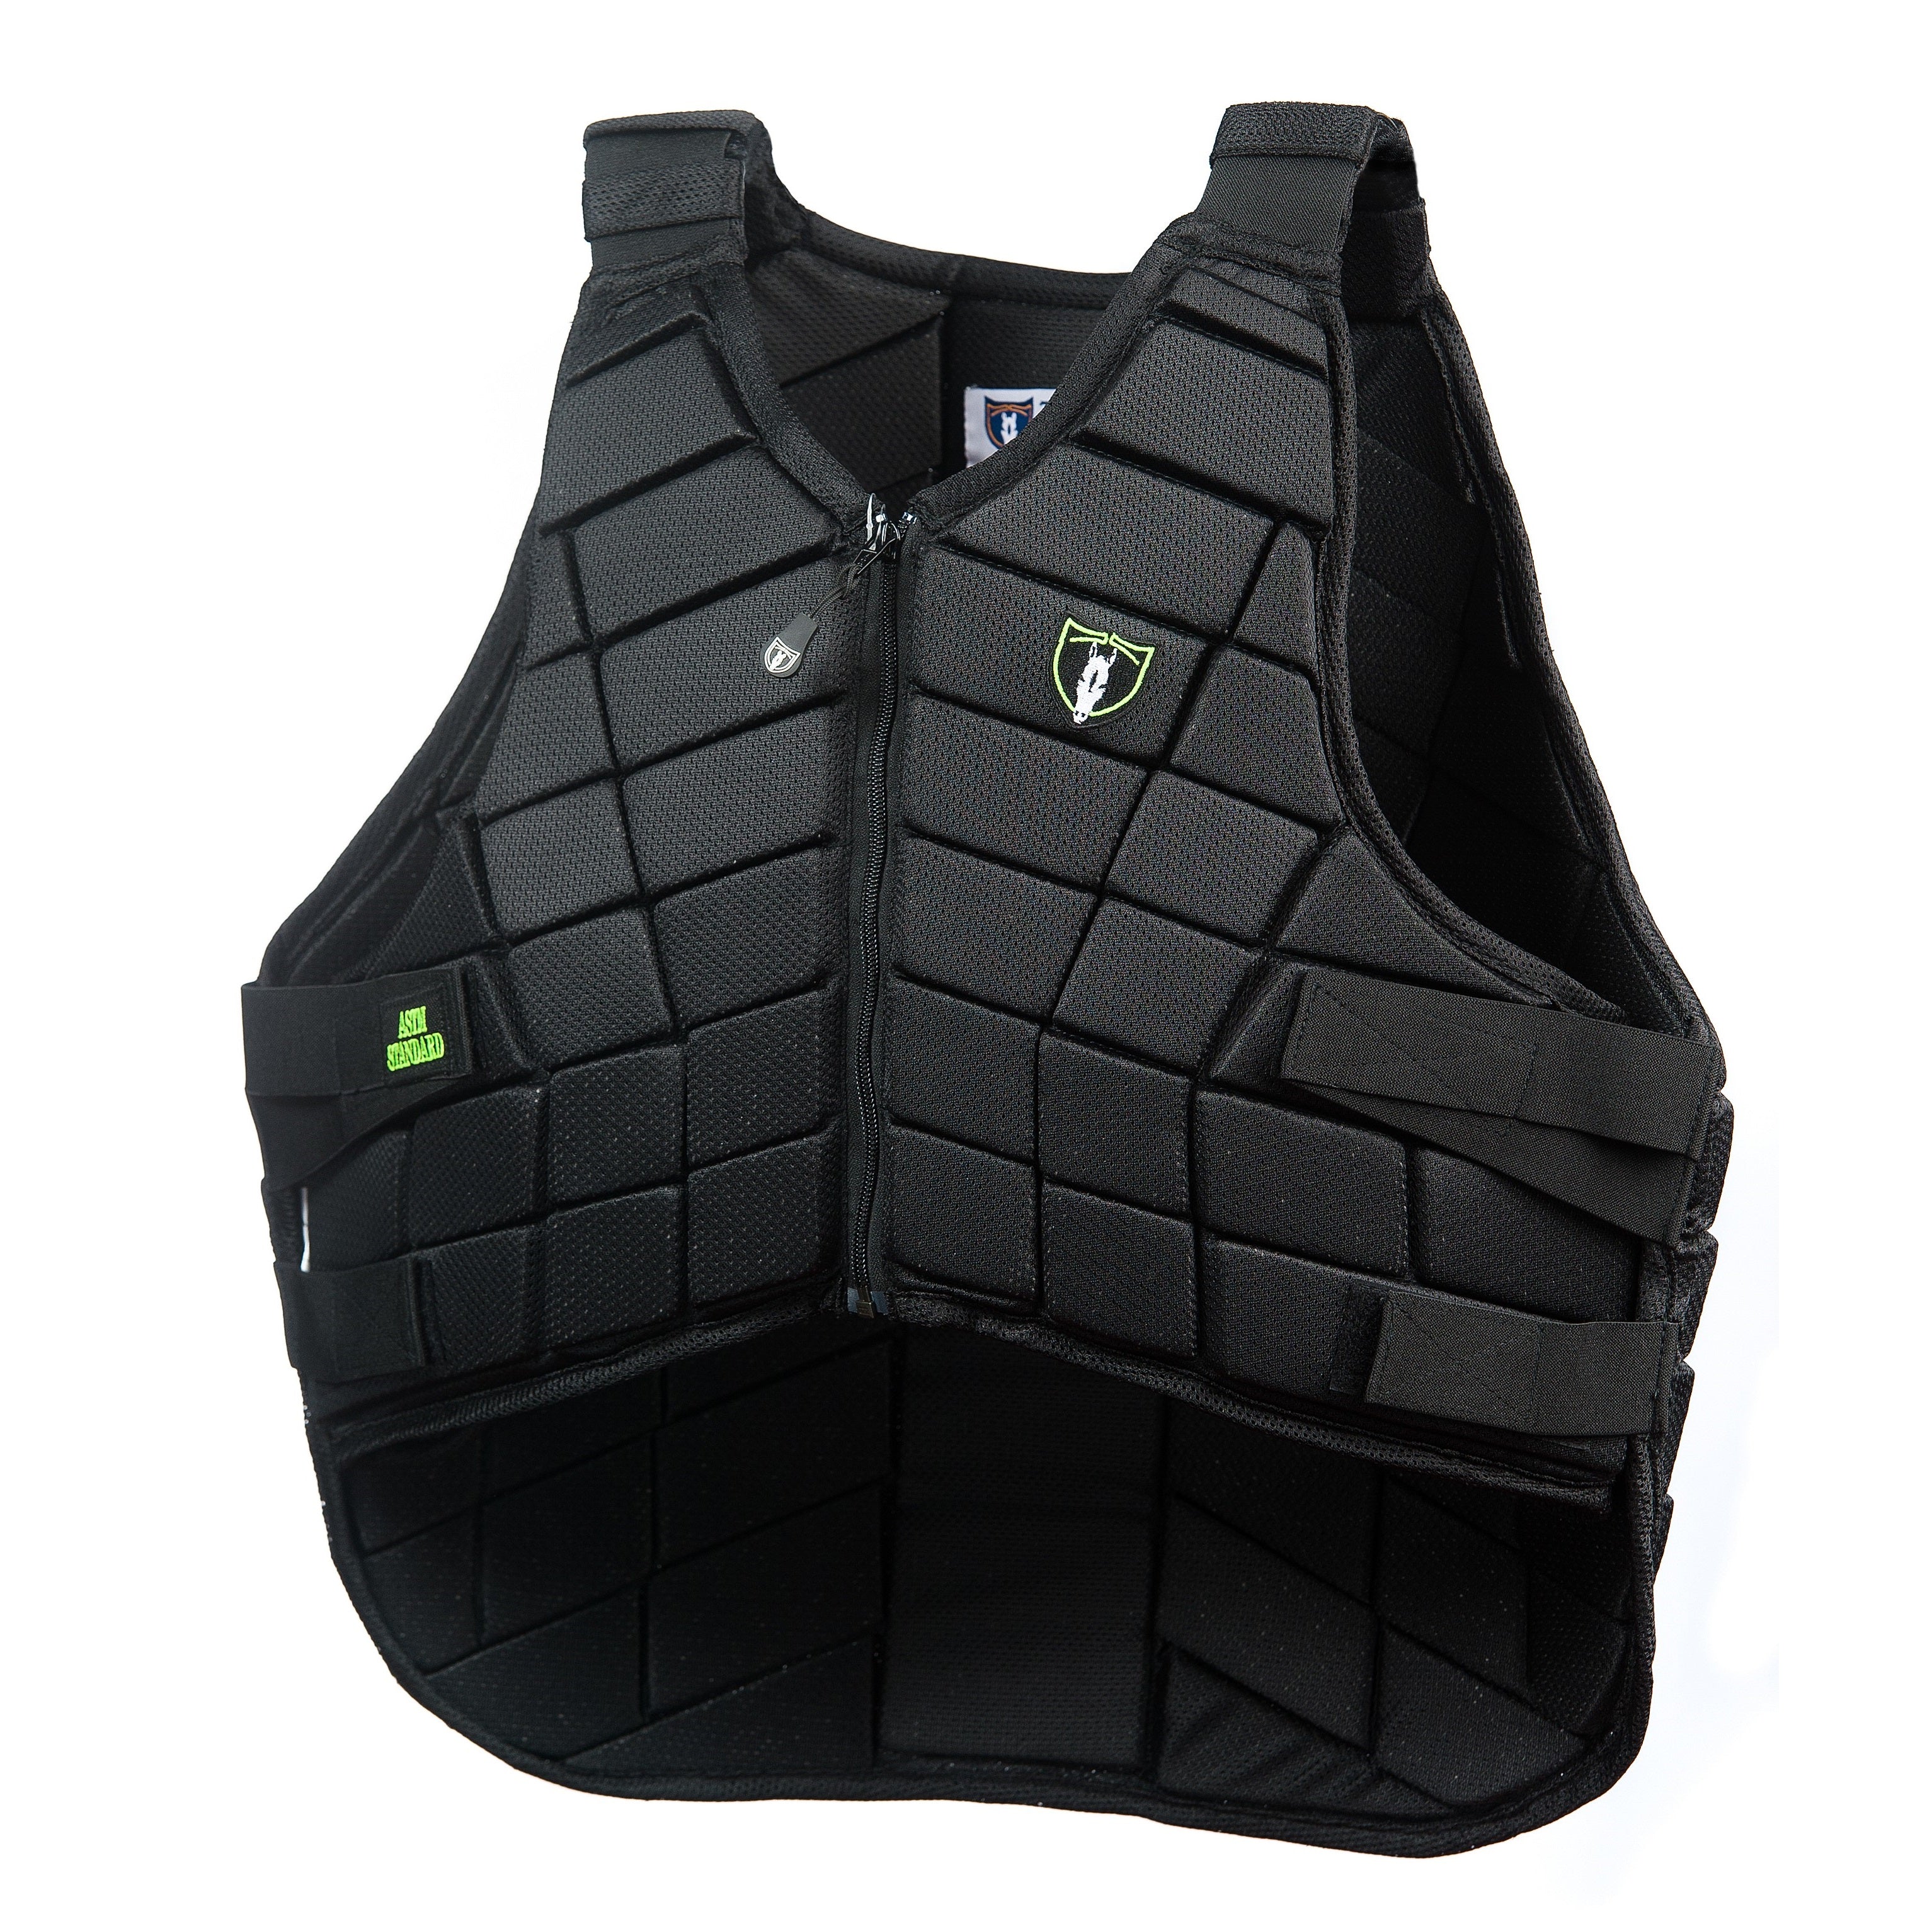 Tipperary Competitor II Protective Carriage Driving Riding Vest